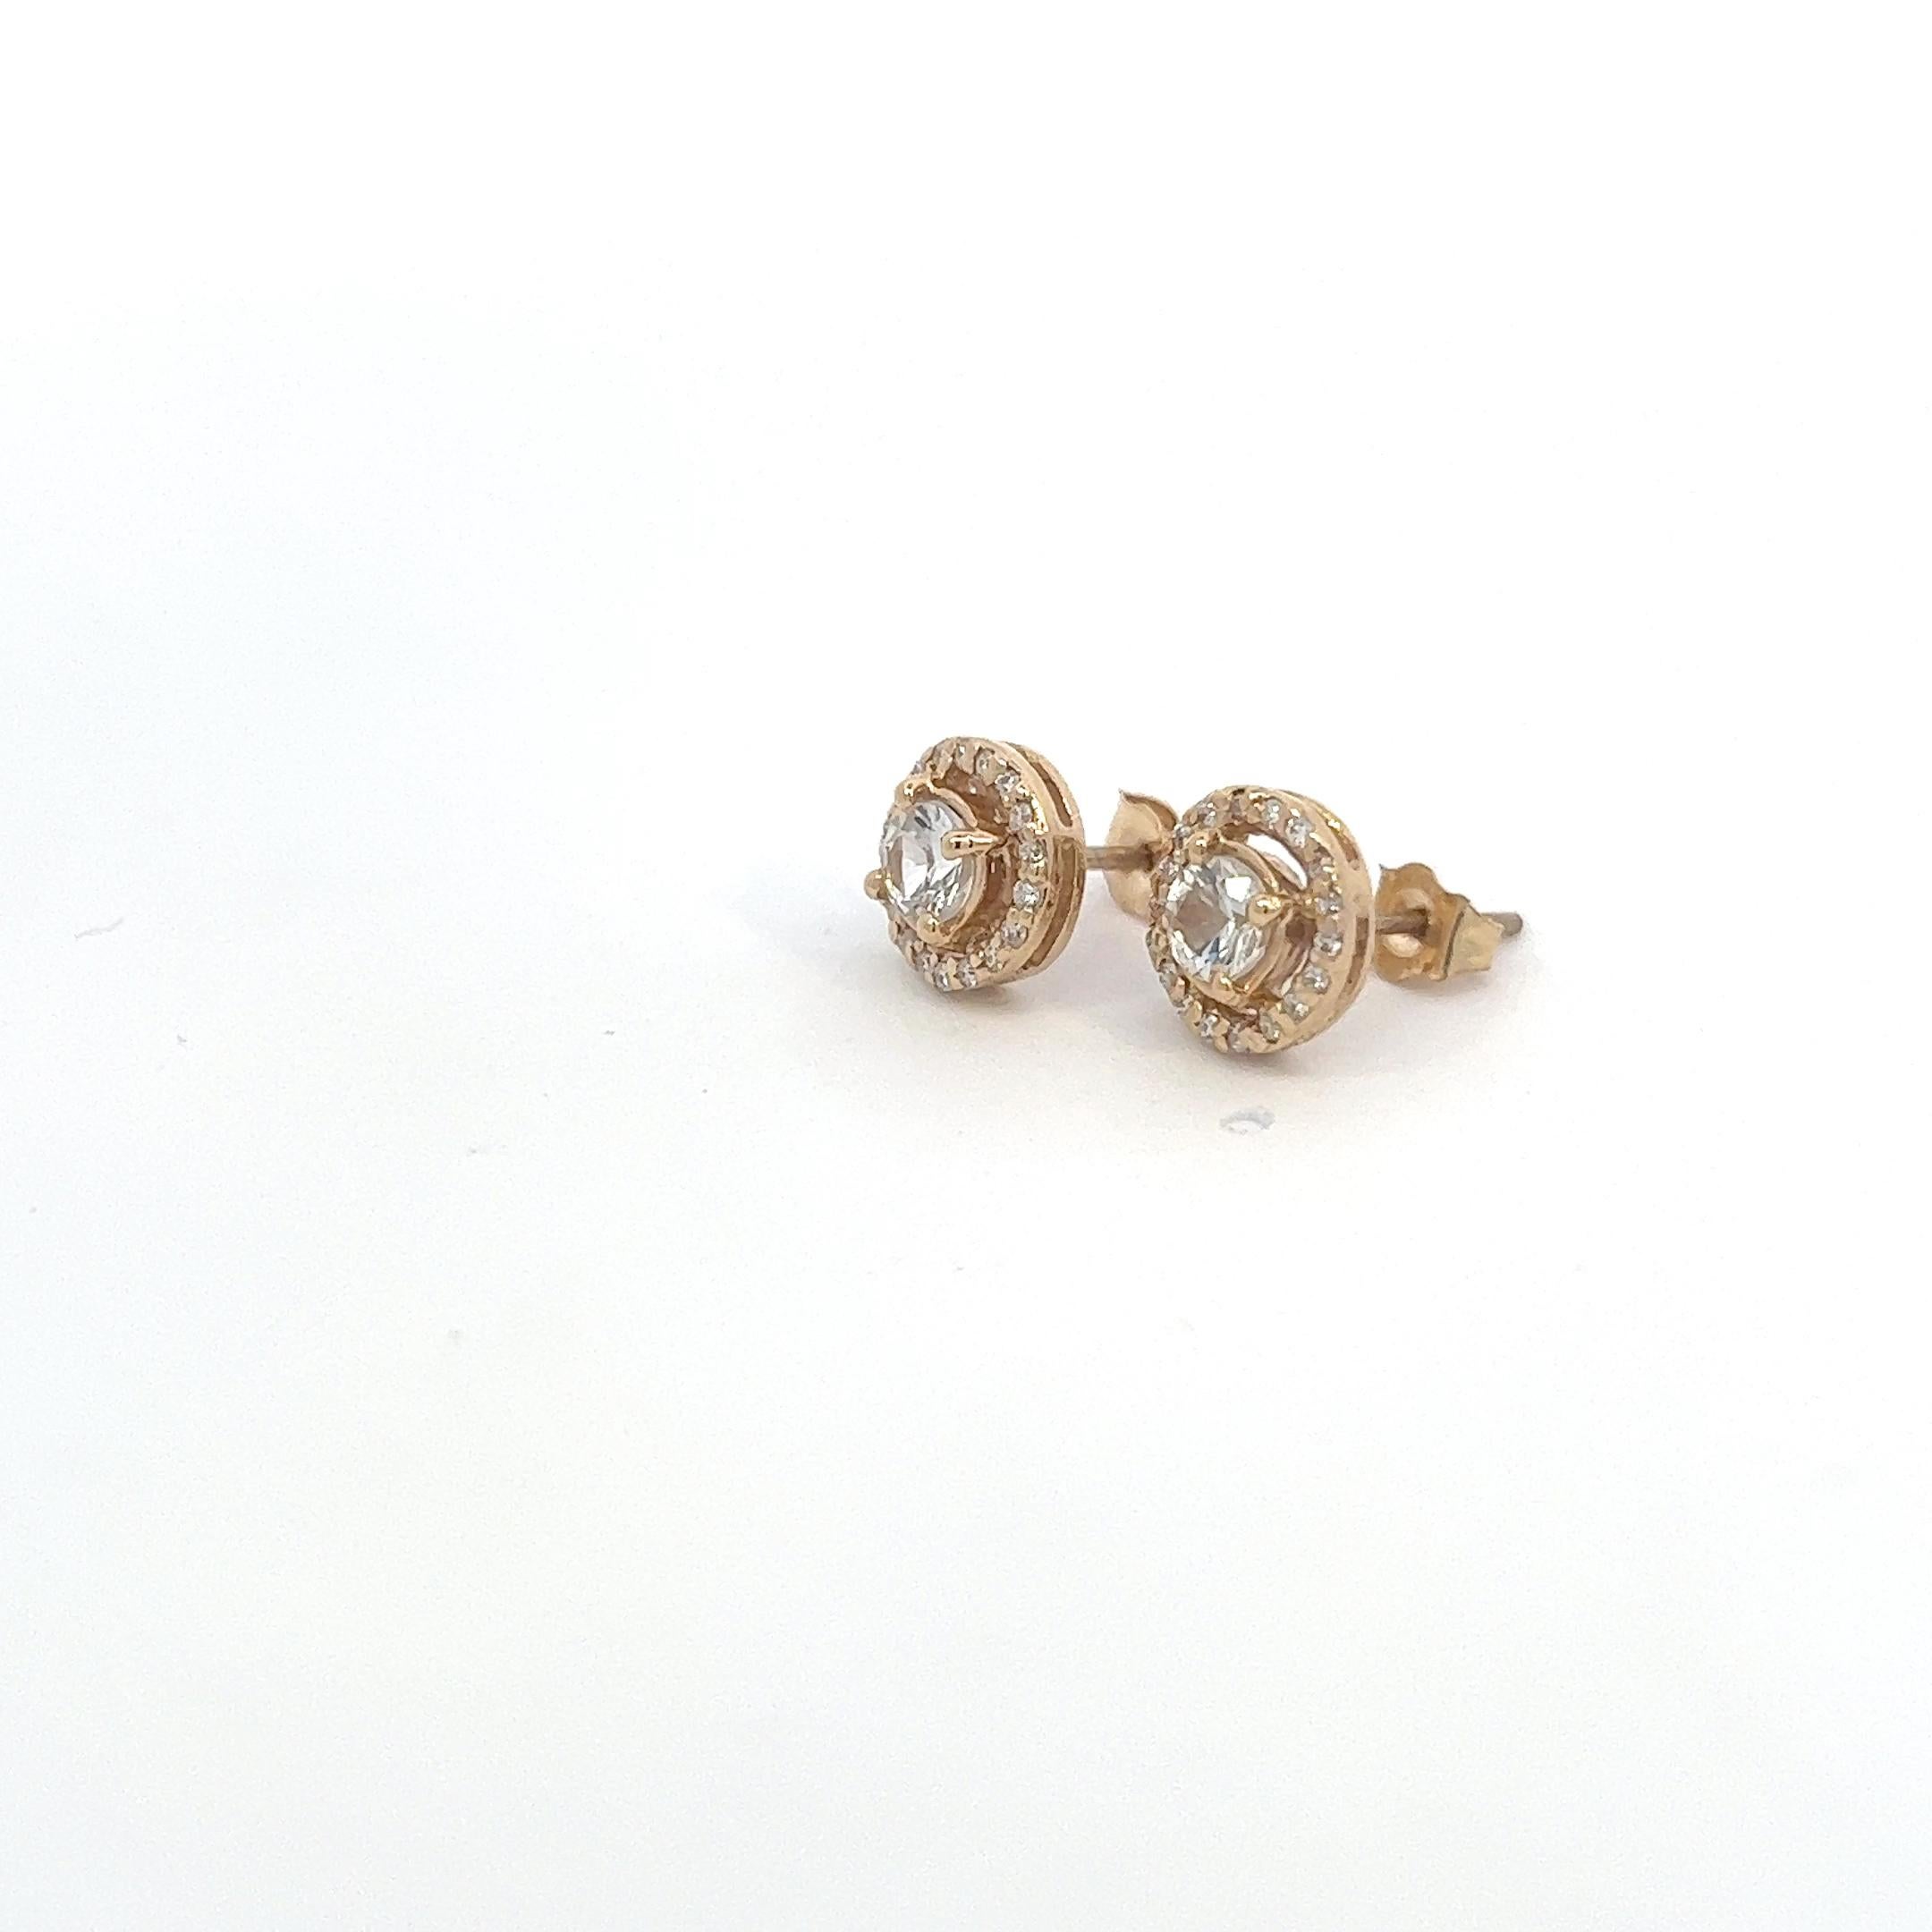 Women's Natural White Sapphire Diamond Stud Earrings 14k Yellow Gold 0.97 TCW Certified For Sale